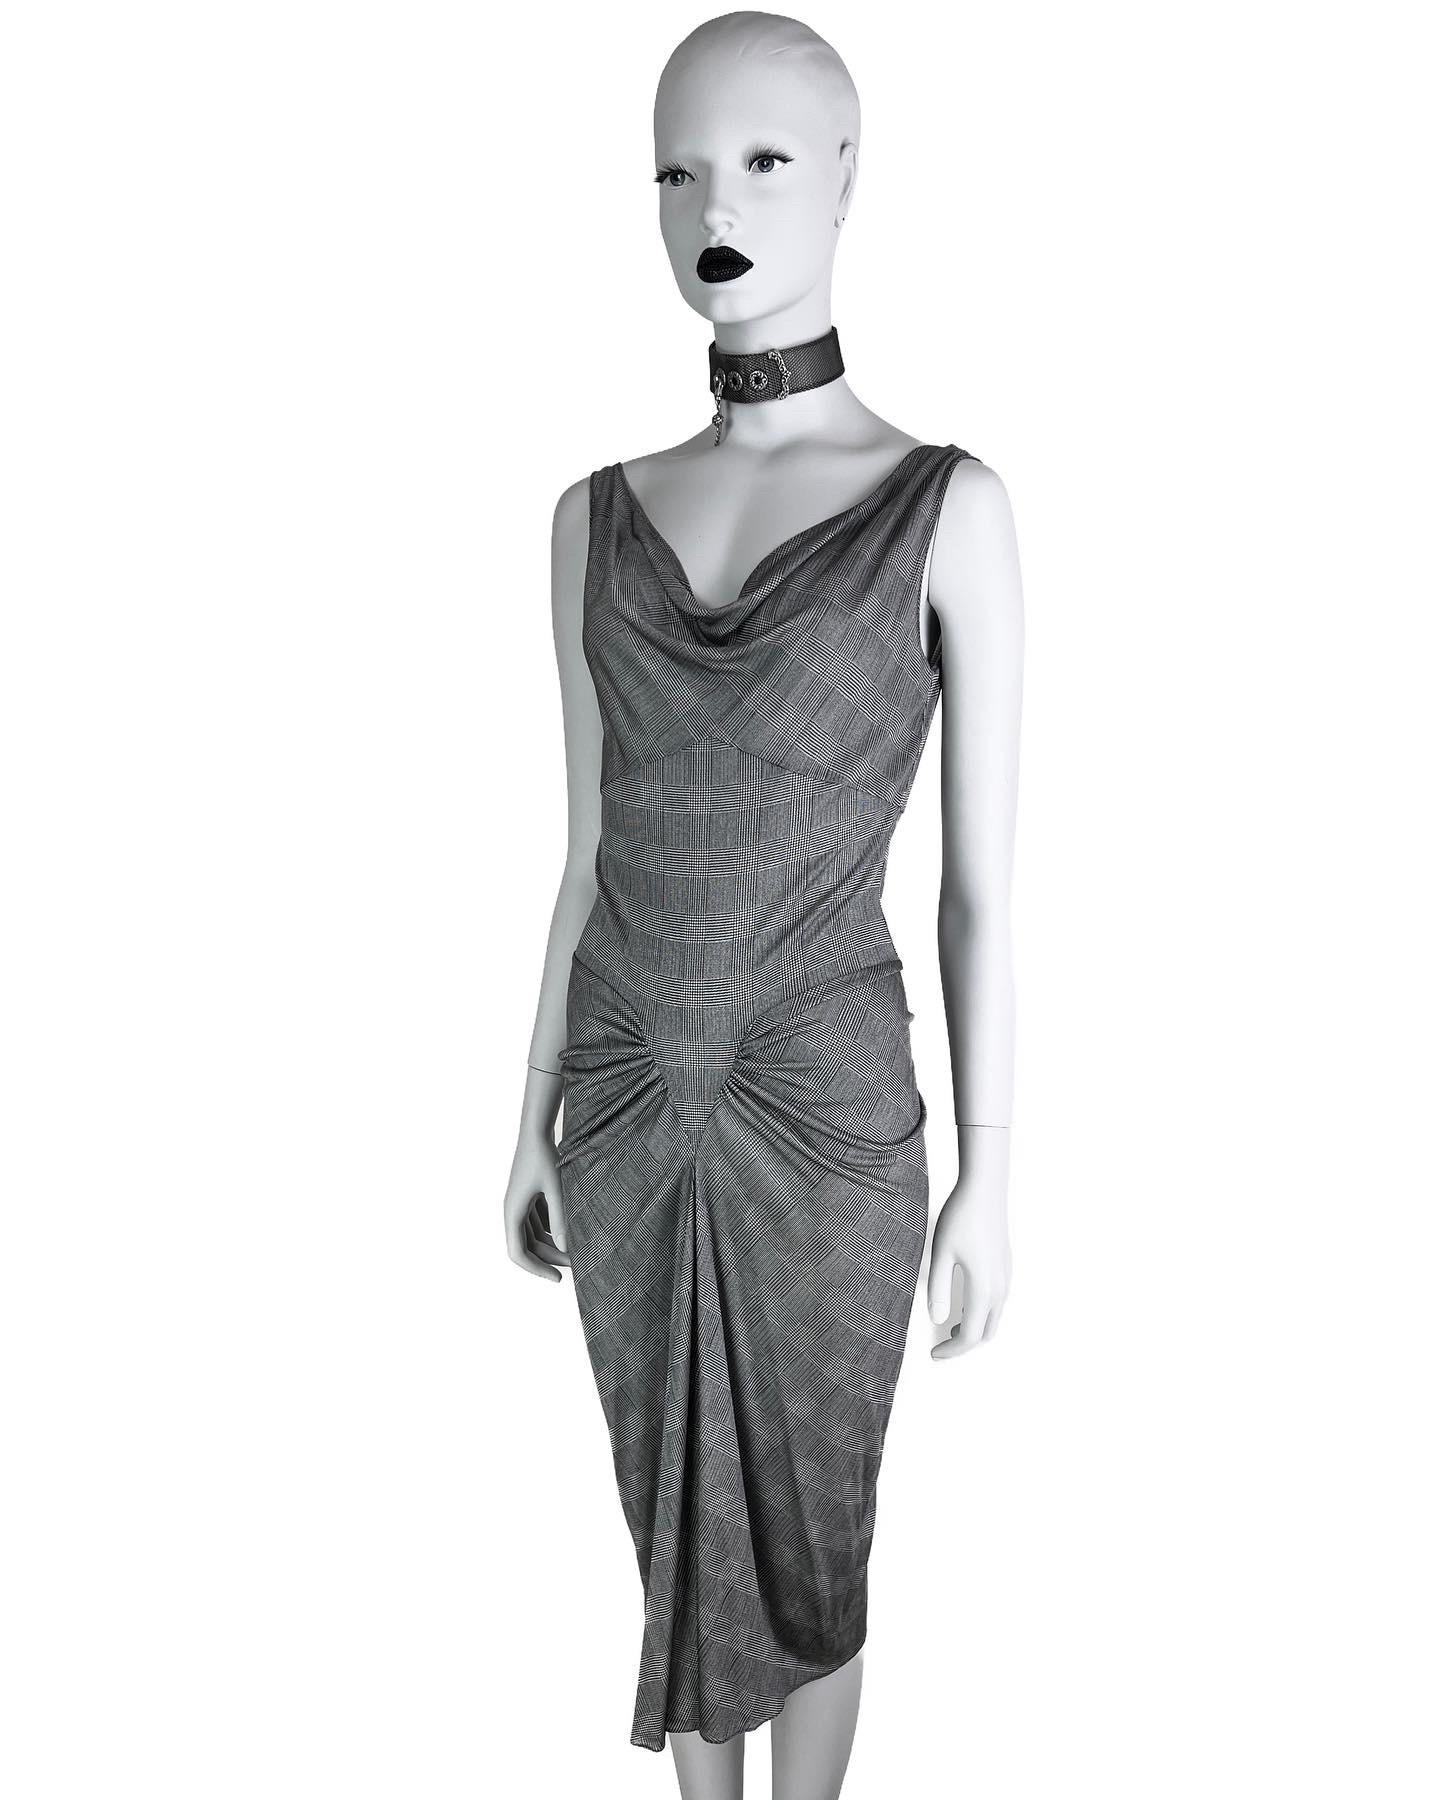 A stunning 100% silk jersey dress from Spring 2000 season with the most flattering cut and draping. This style is highly sought-after, a similar model was presented at the Spring 1999 Couture show. 

Size FR 40, which corresponds to Medium, but the